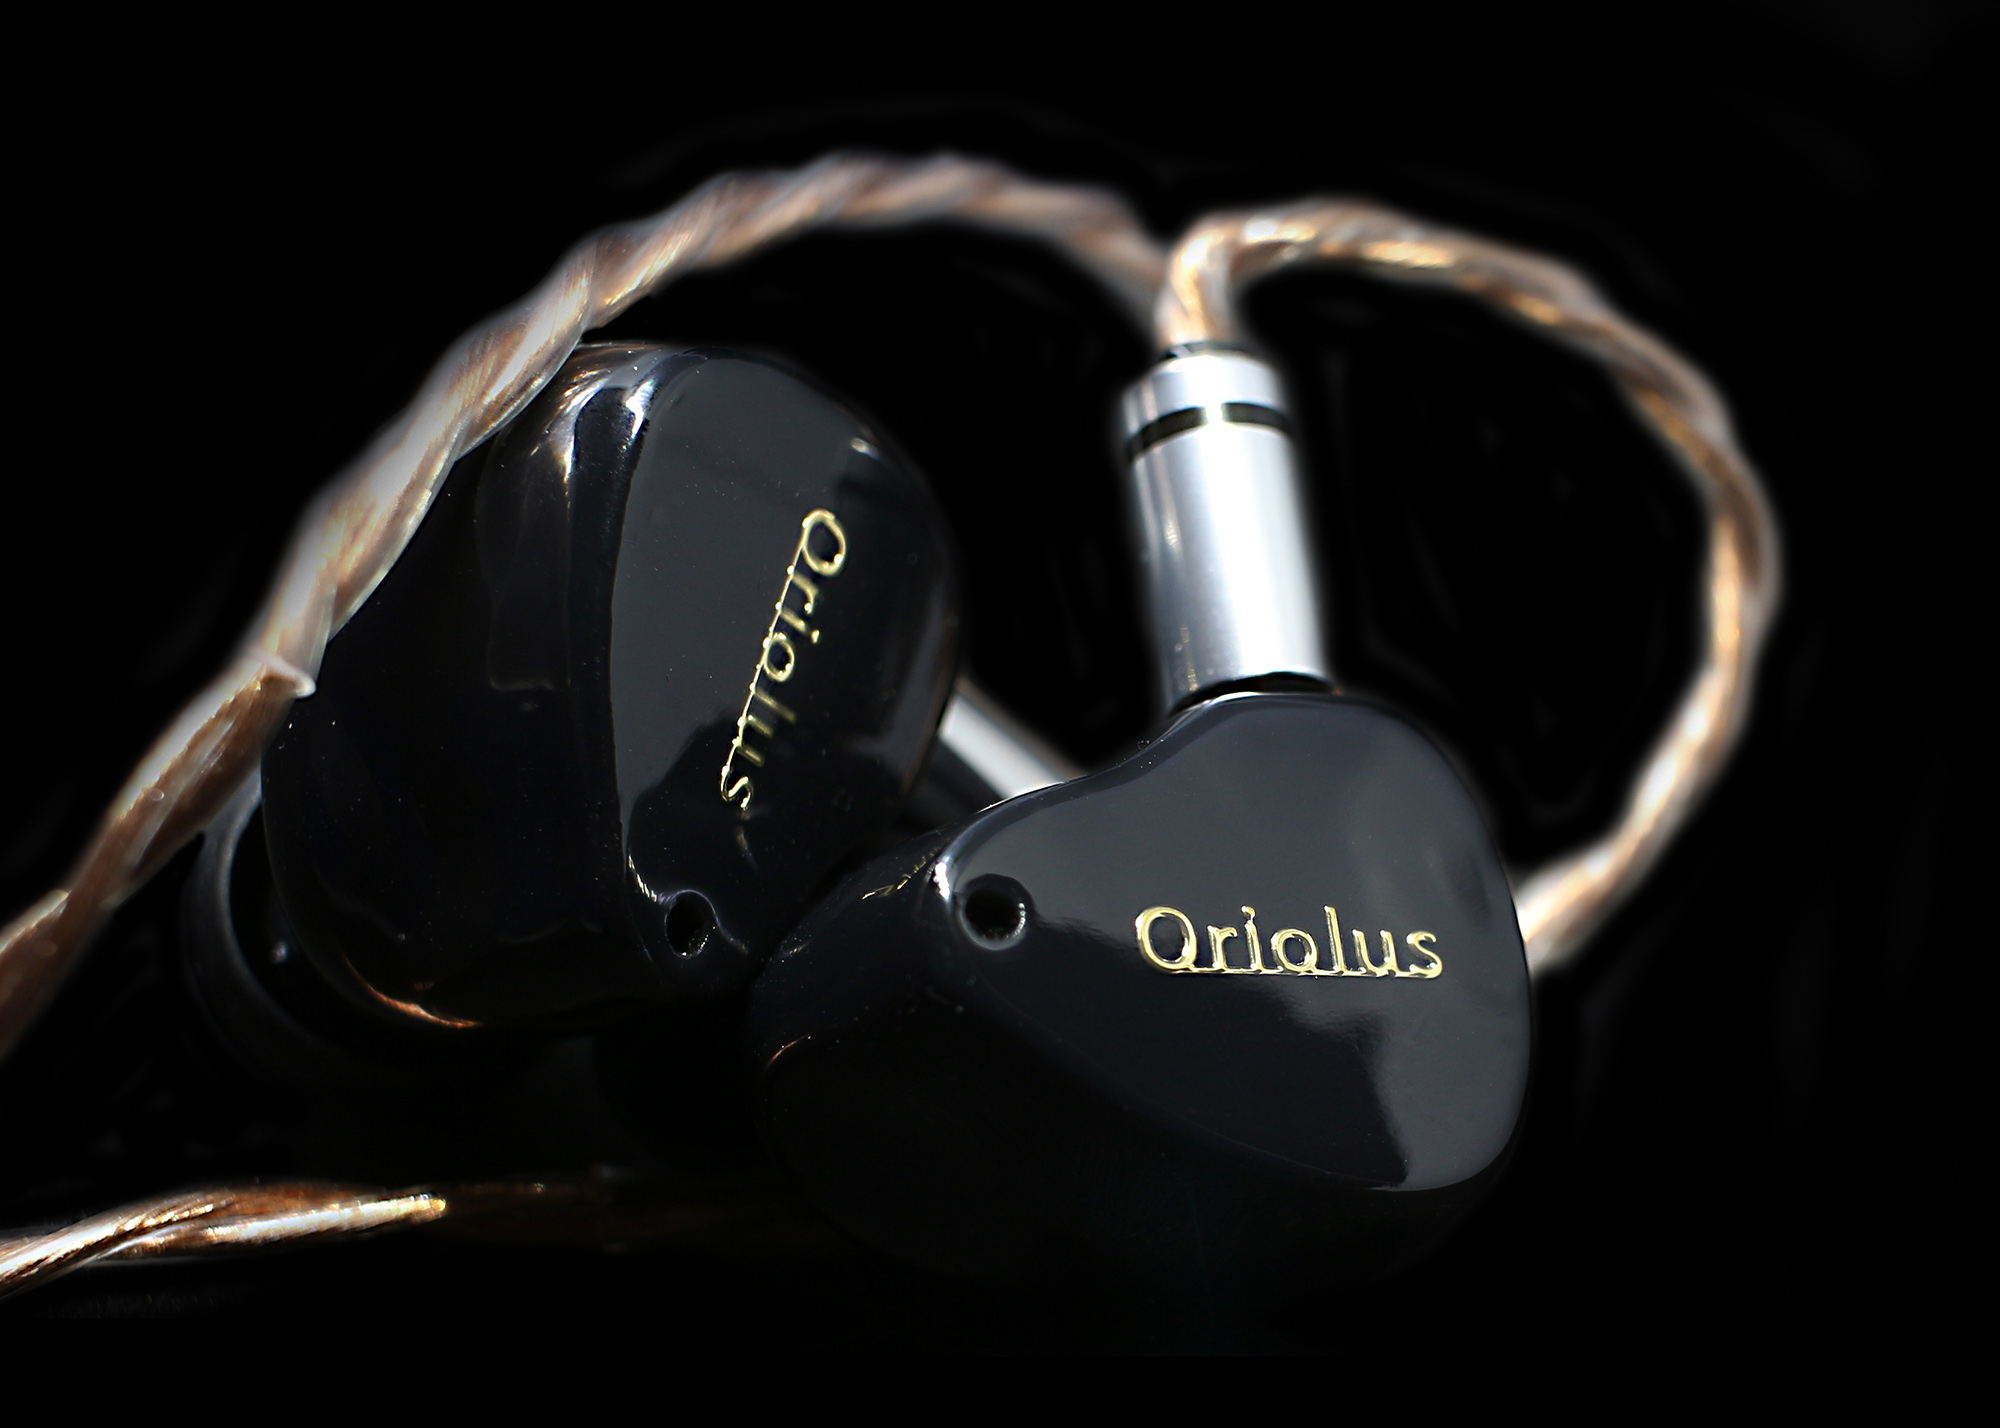 Oriolus Reborn | Headphone Reviews and Discussion - Head-Fi.org